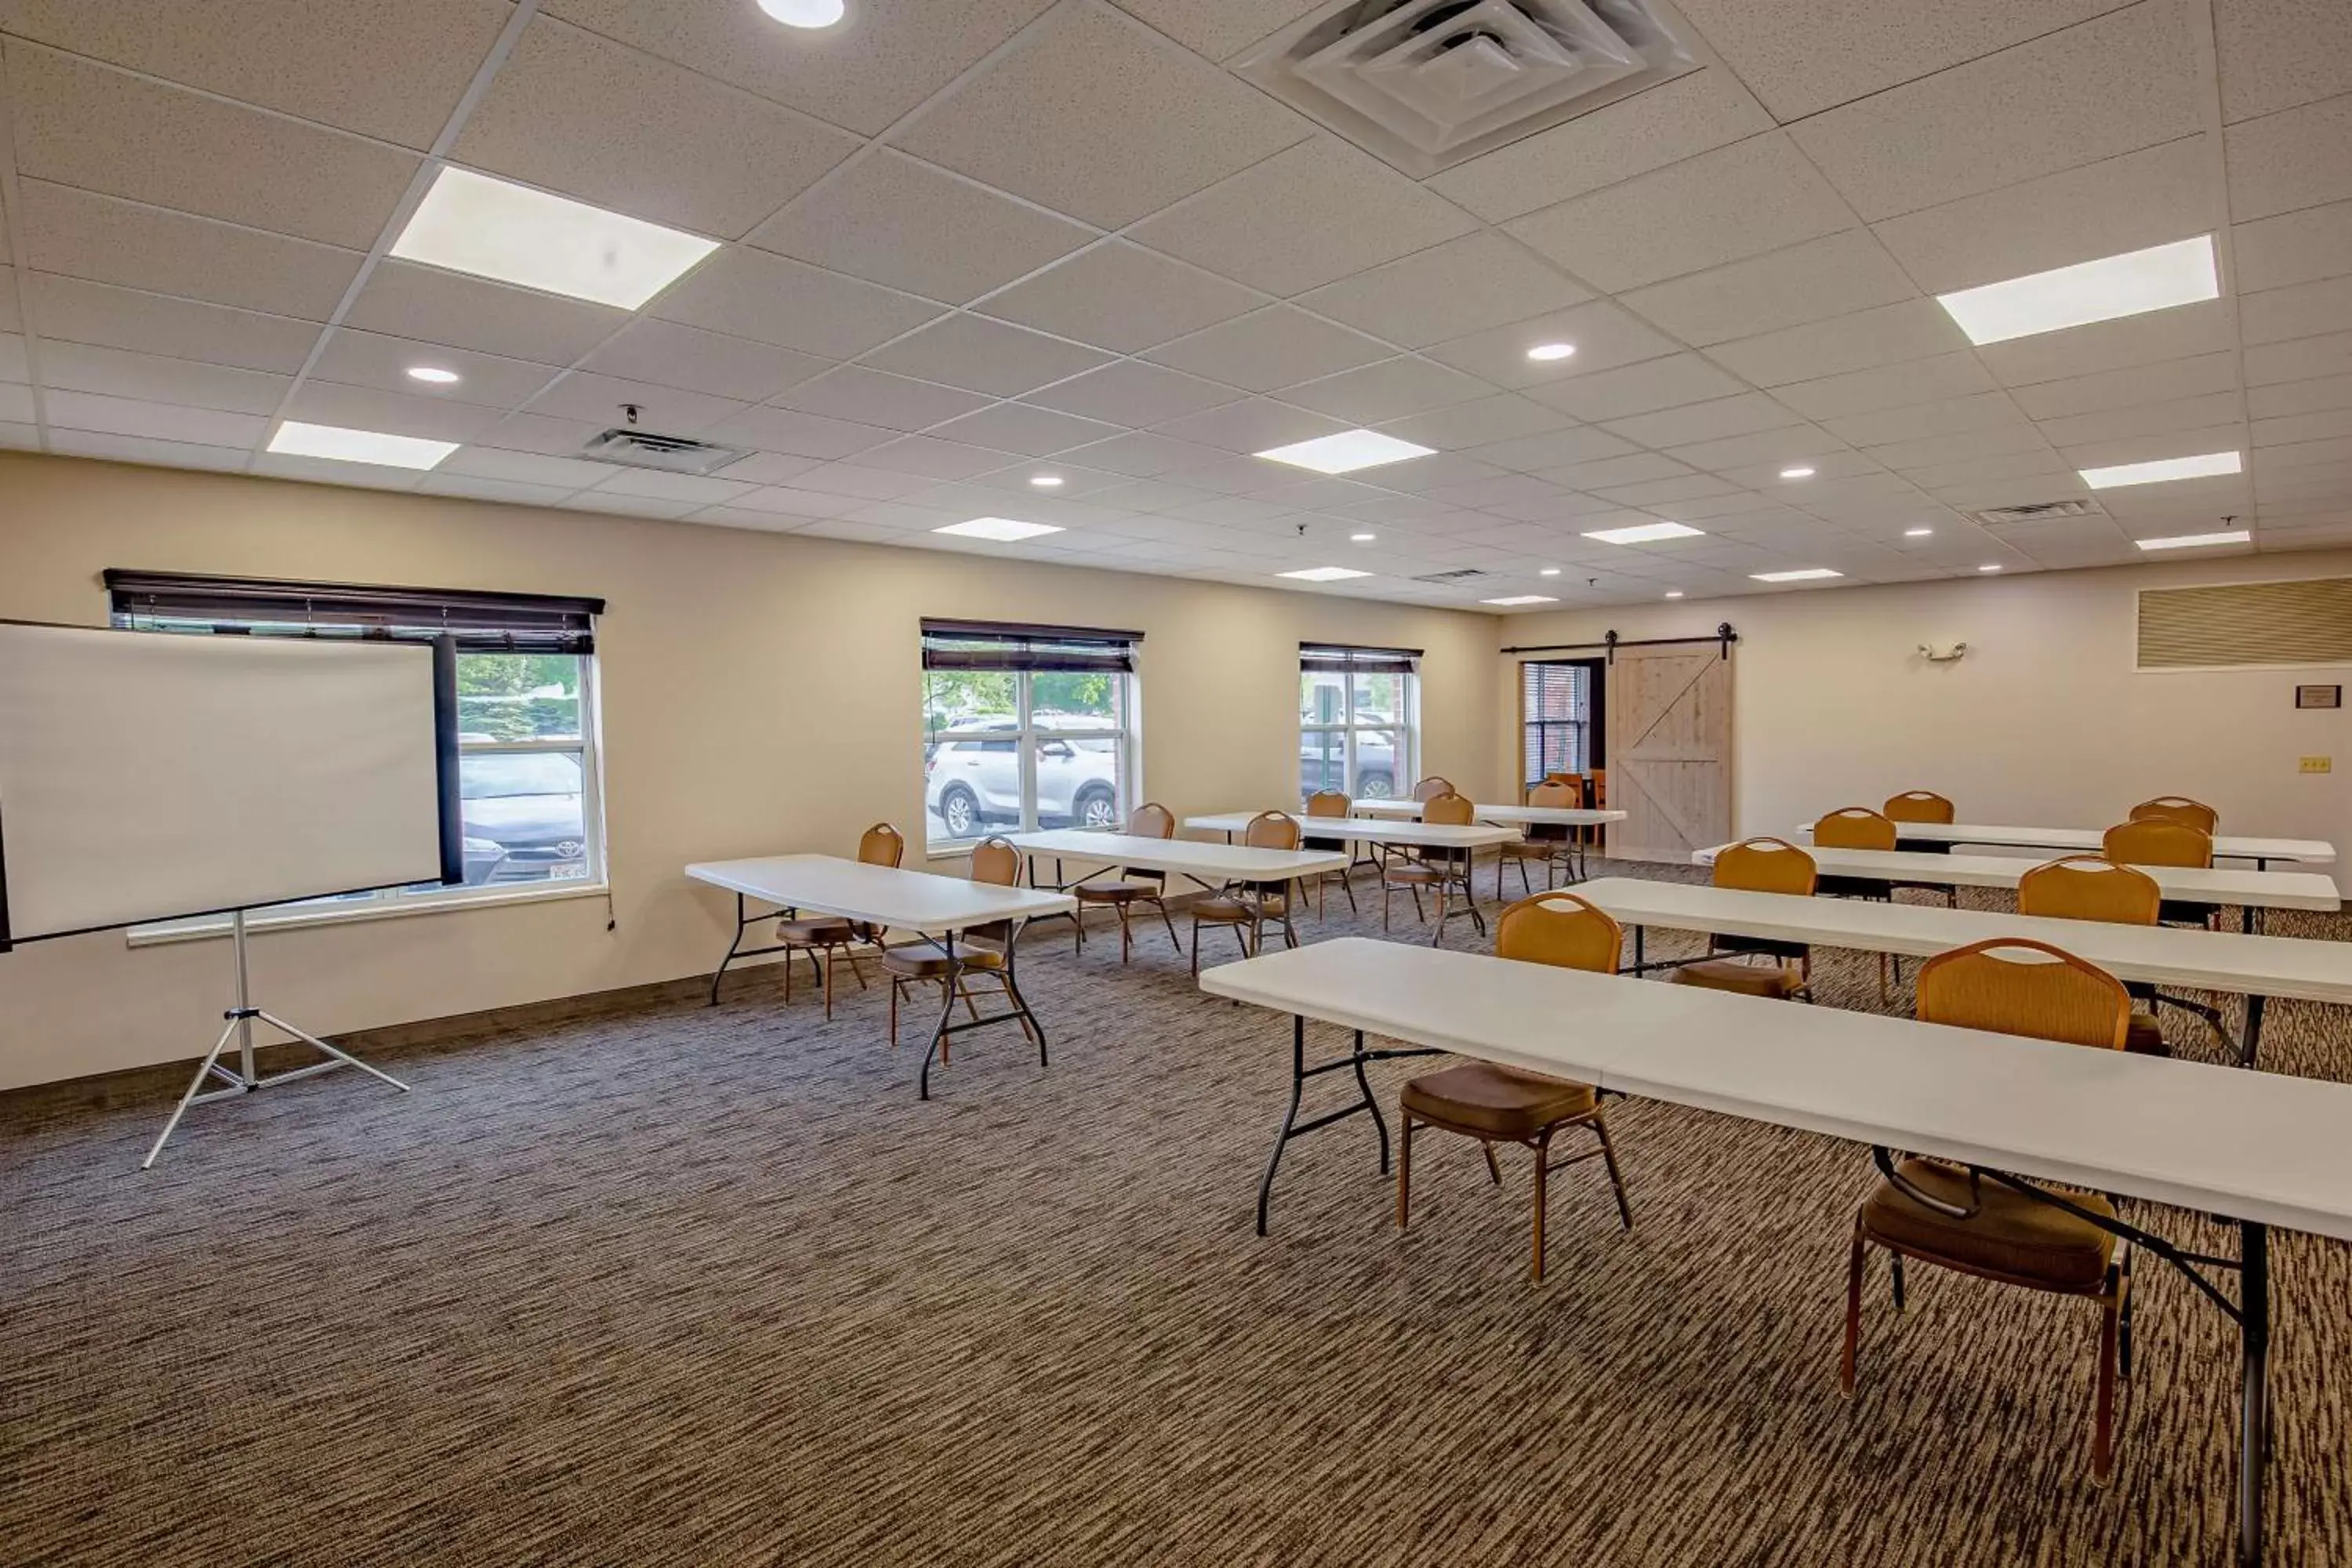 Meeting/conference room in Country Inn & Suites by Radisson, Crystal Lake, IL